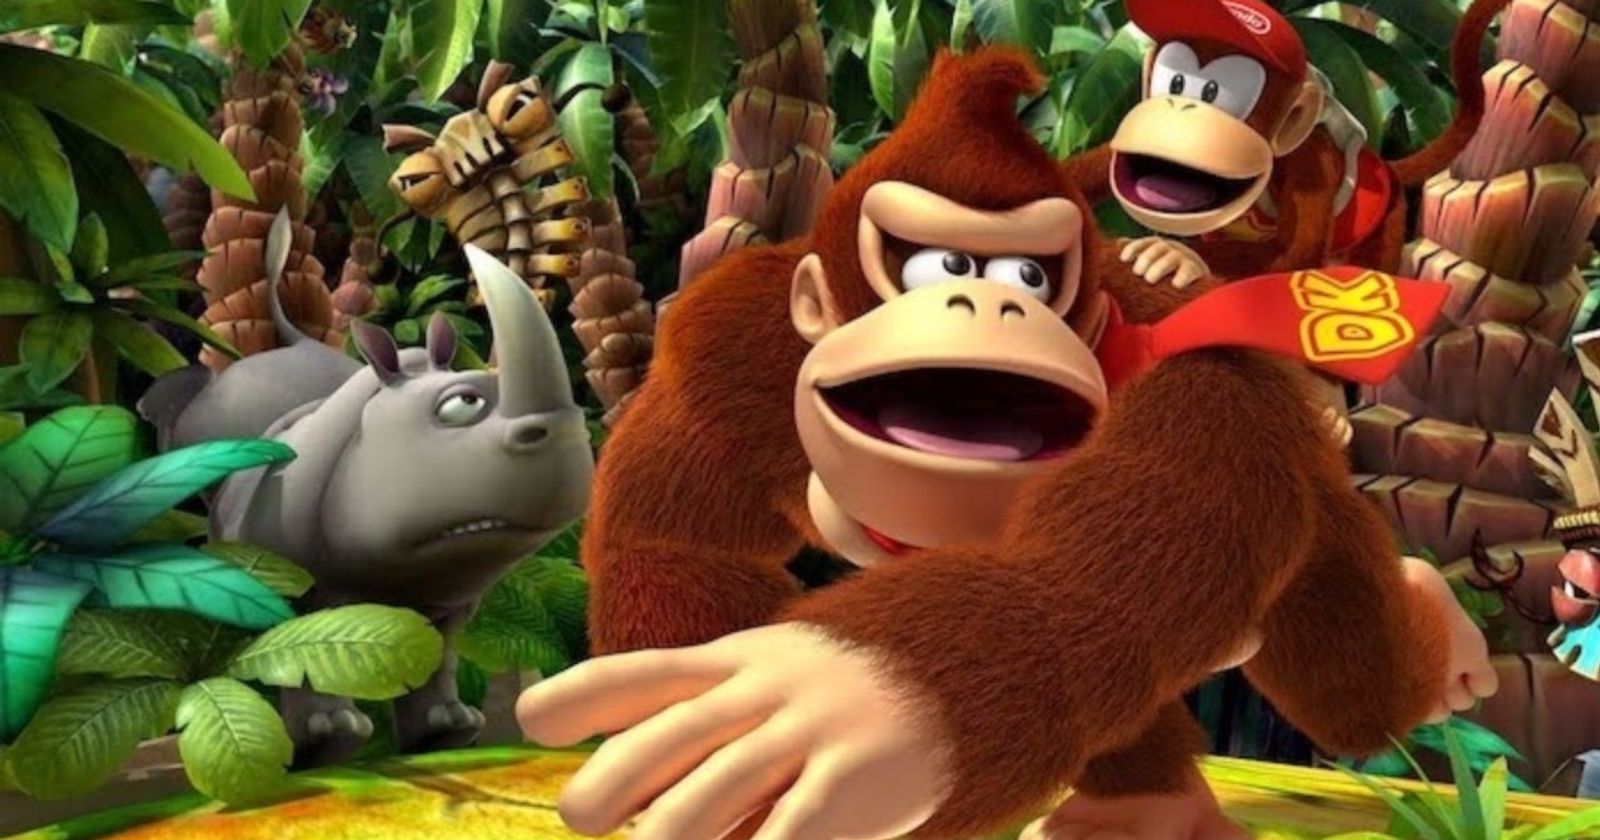 Nintendo is reportedly planning 'a big Donkey Kong push' including